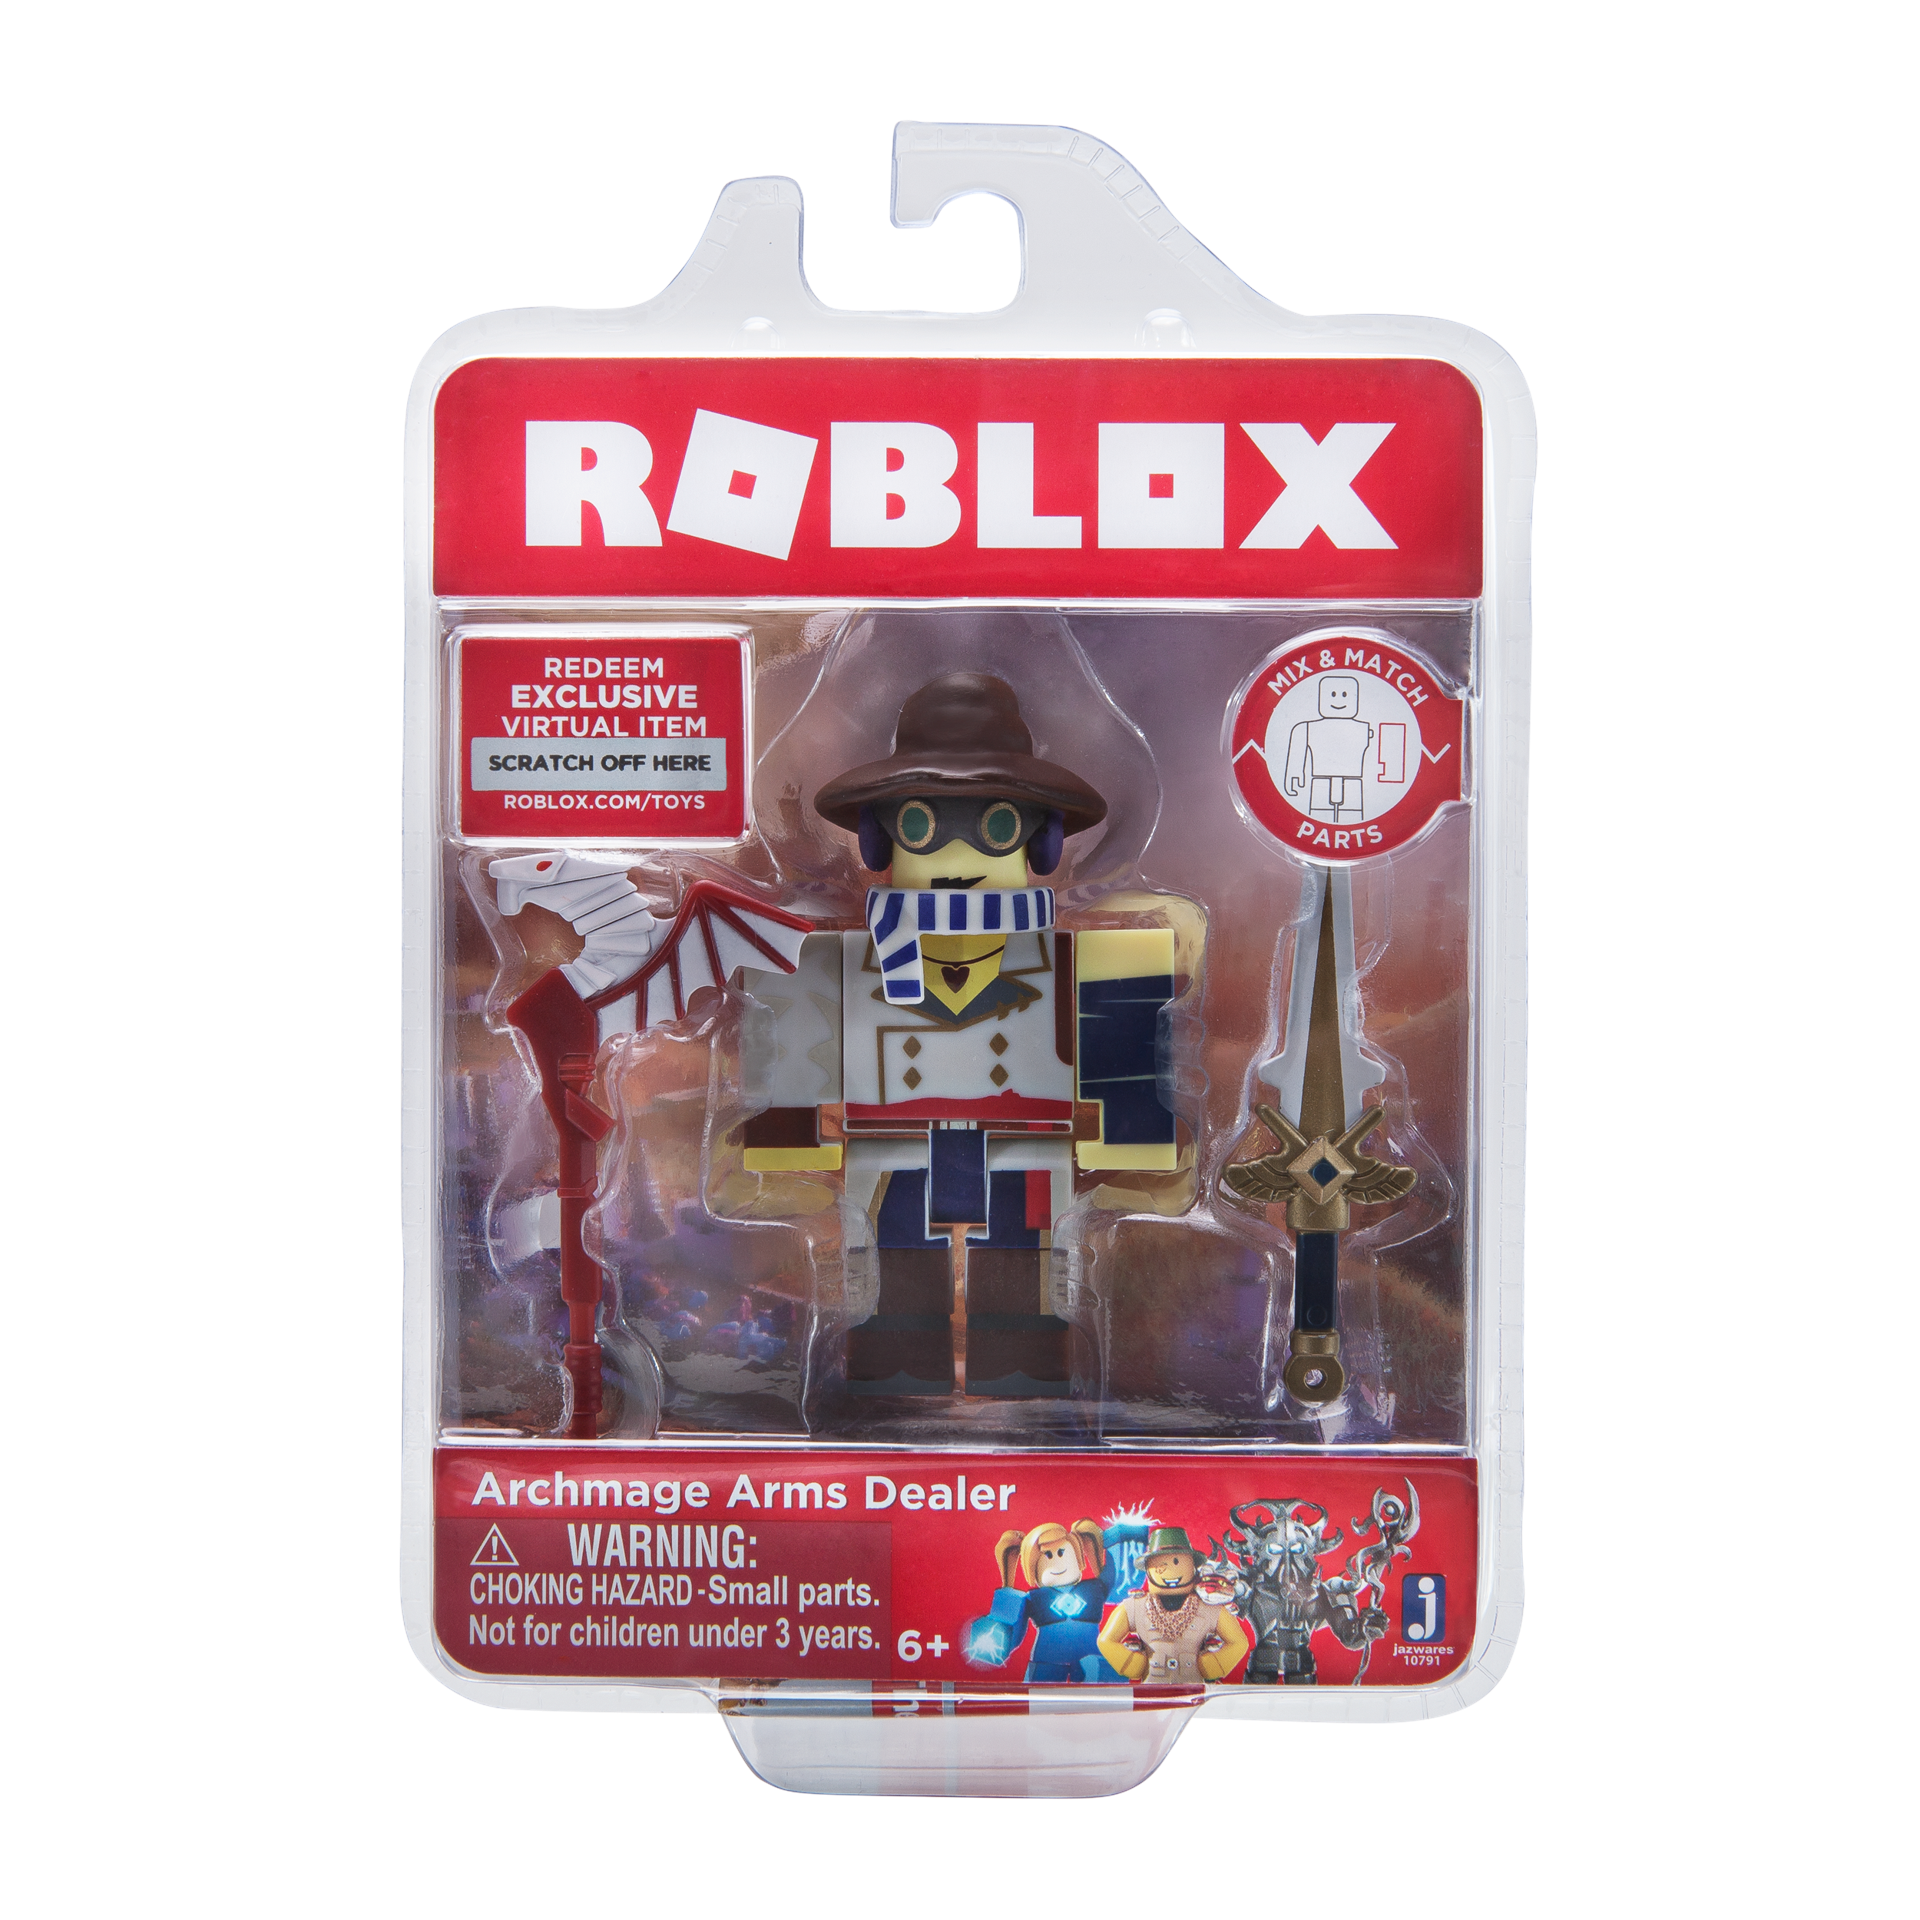 Buy Roblox Archmage Arms Dealer - nintendo switch mini obby roblox